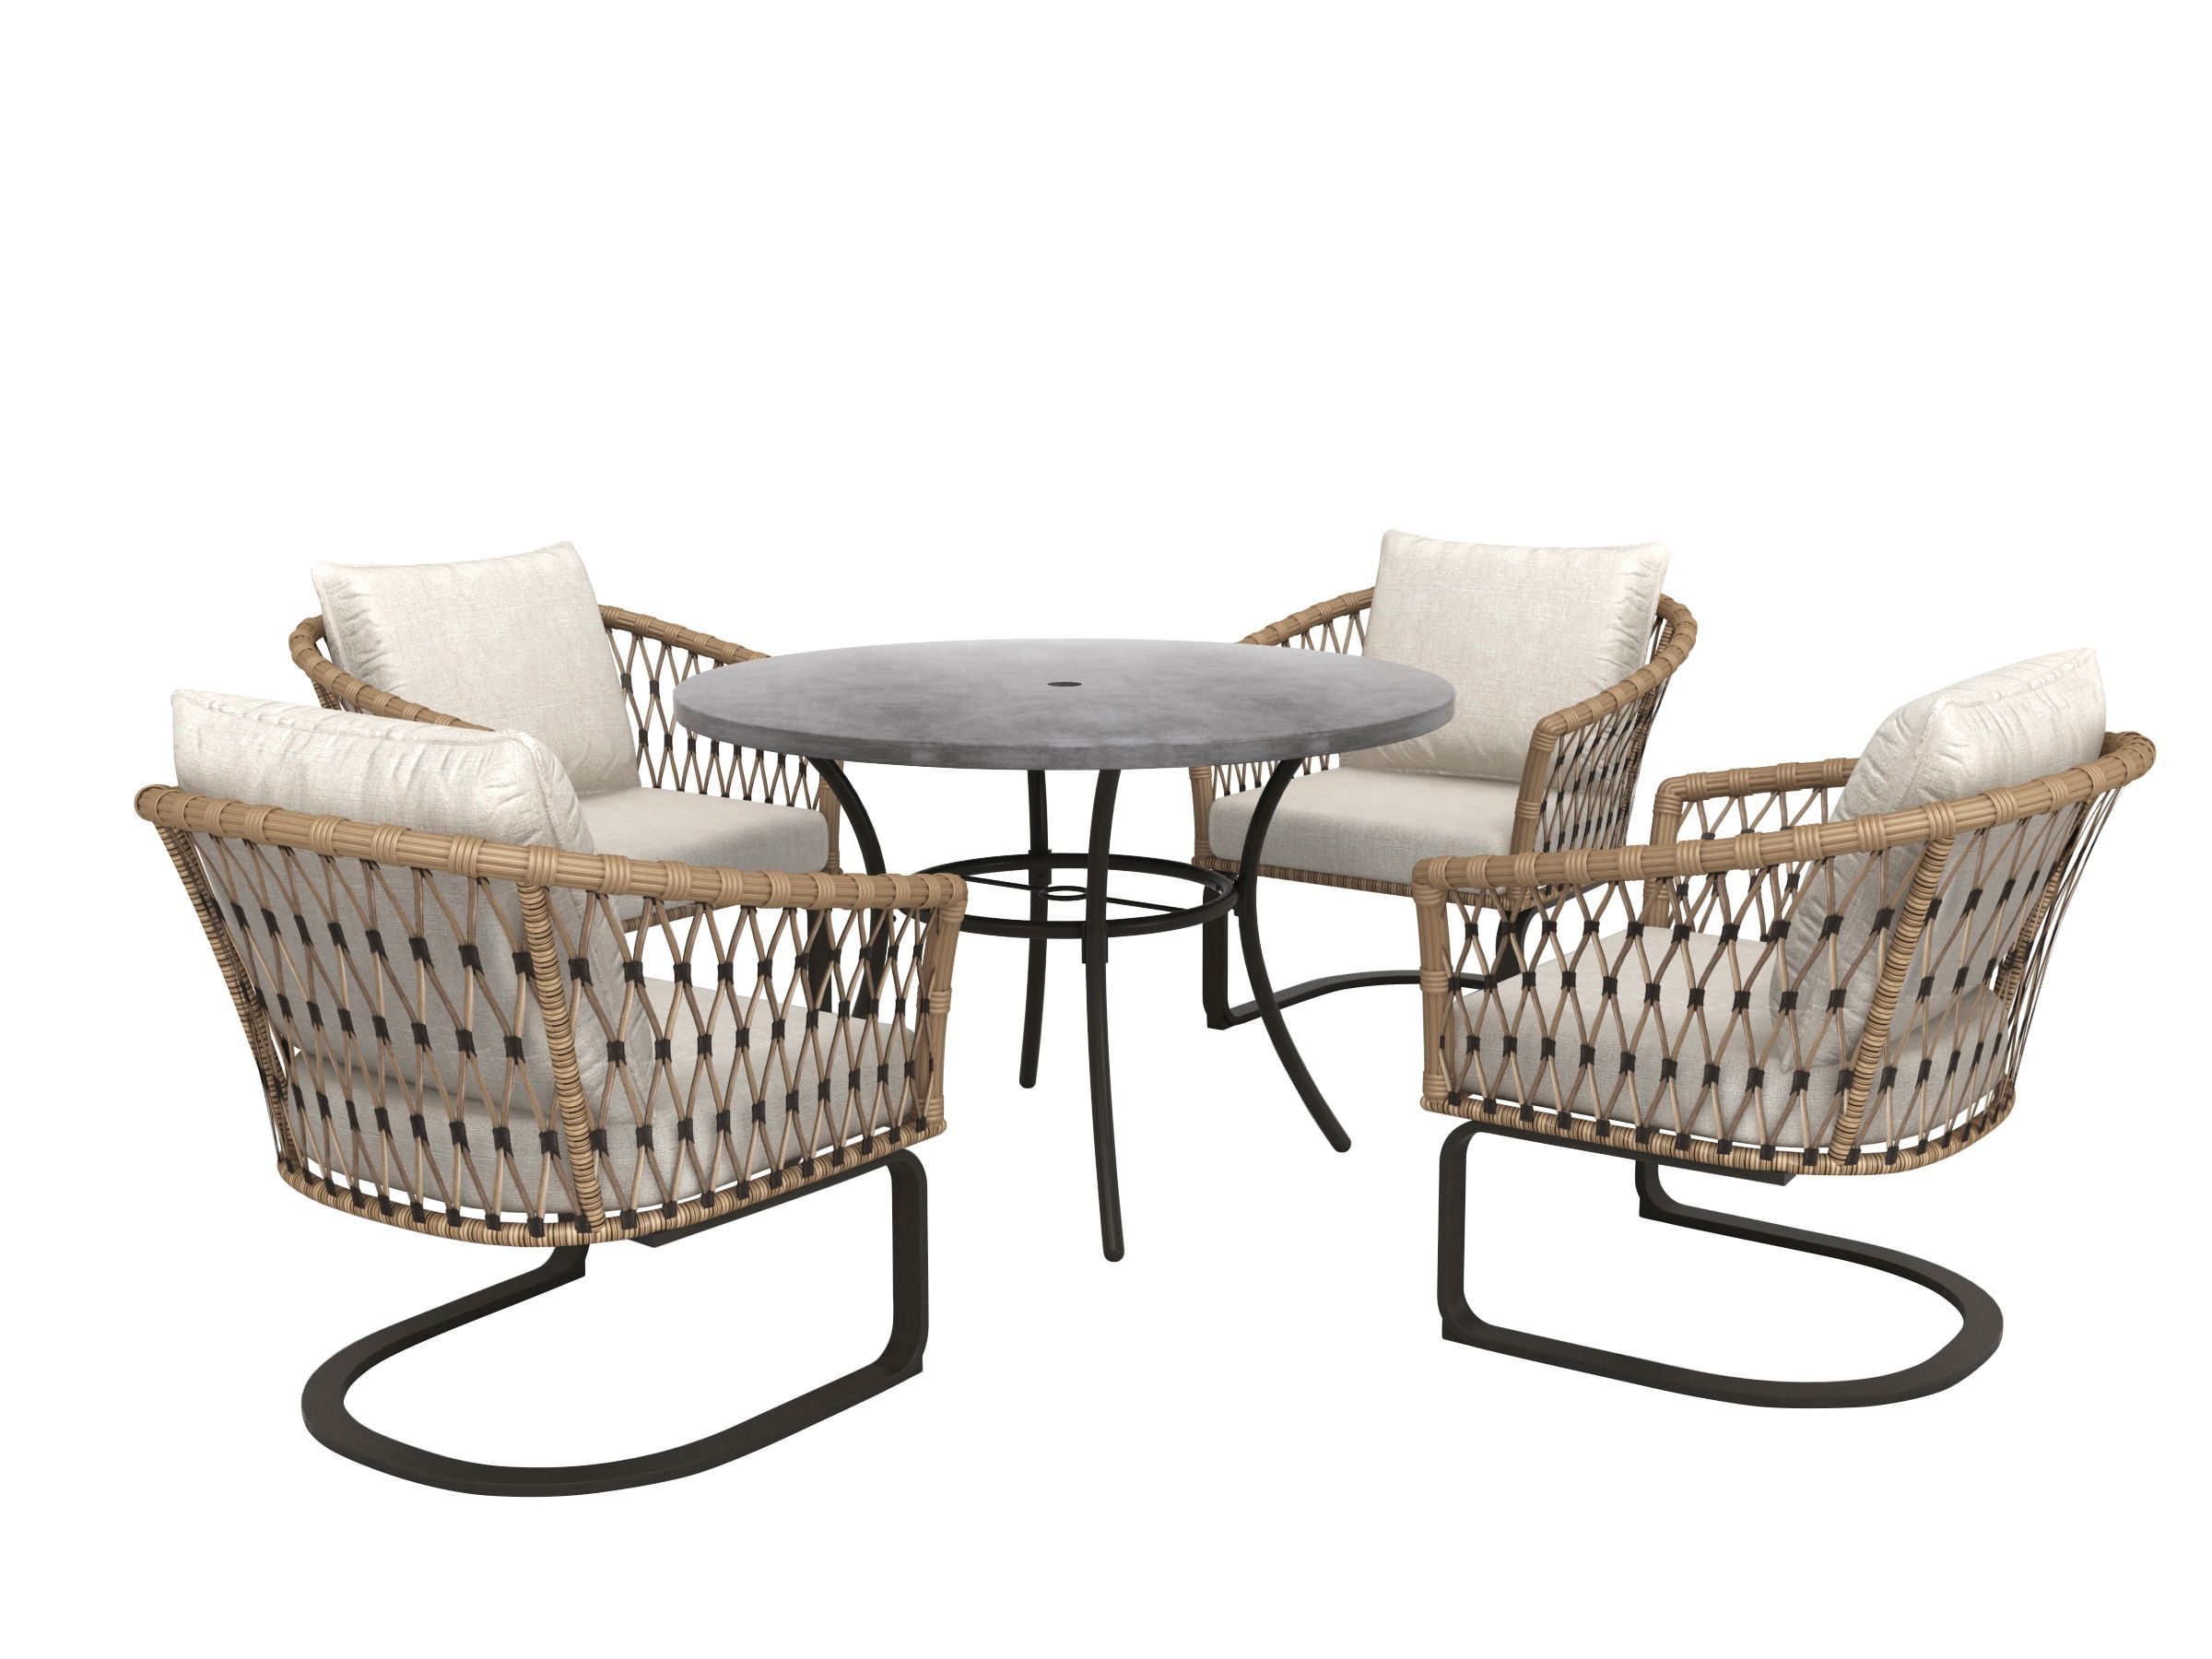 Widely Used Shop Style Selections Avery Station 5 Piece Patio Dining Set At Lowes Throughout 5 Piece Outdoor Patio Furniture Set (View 11 of 15)